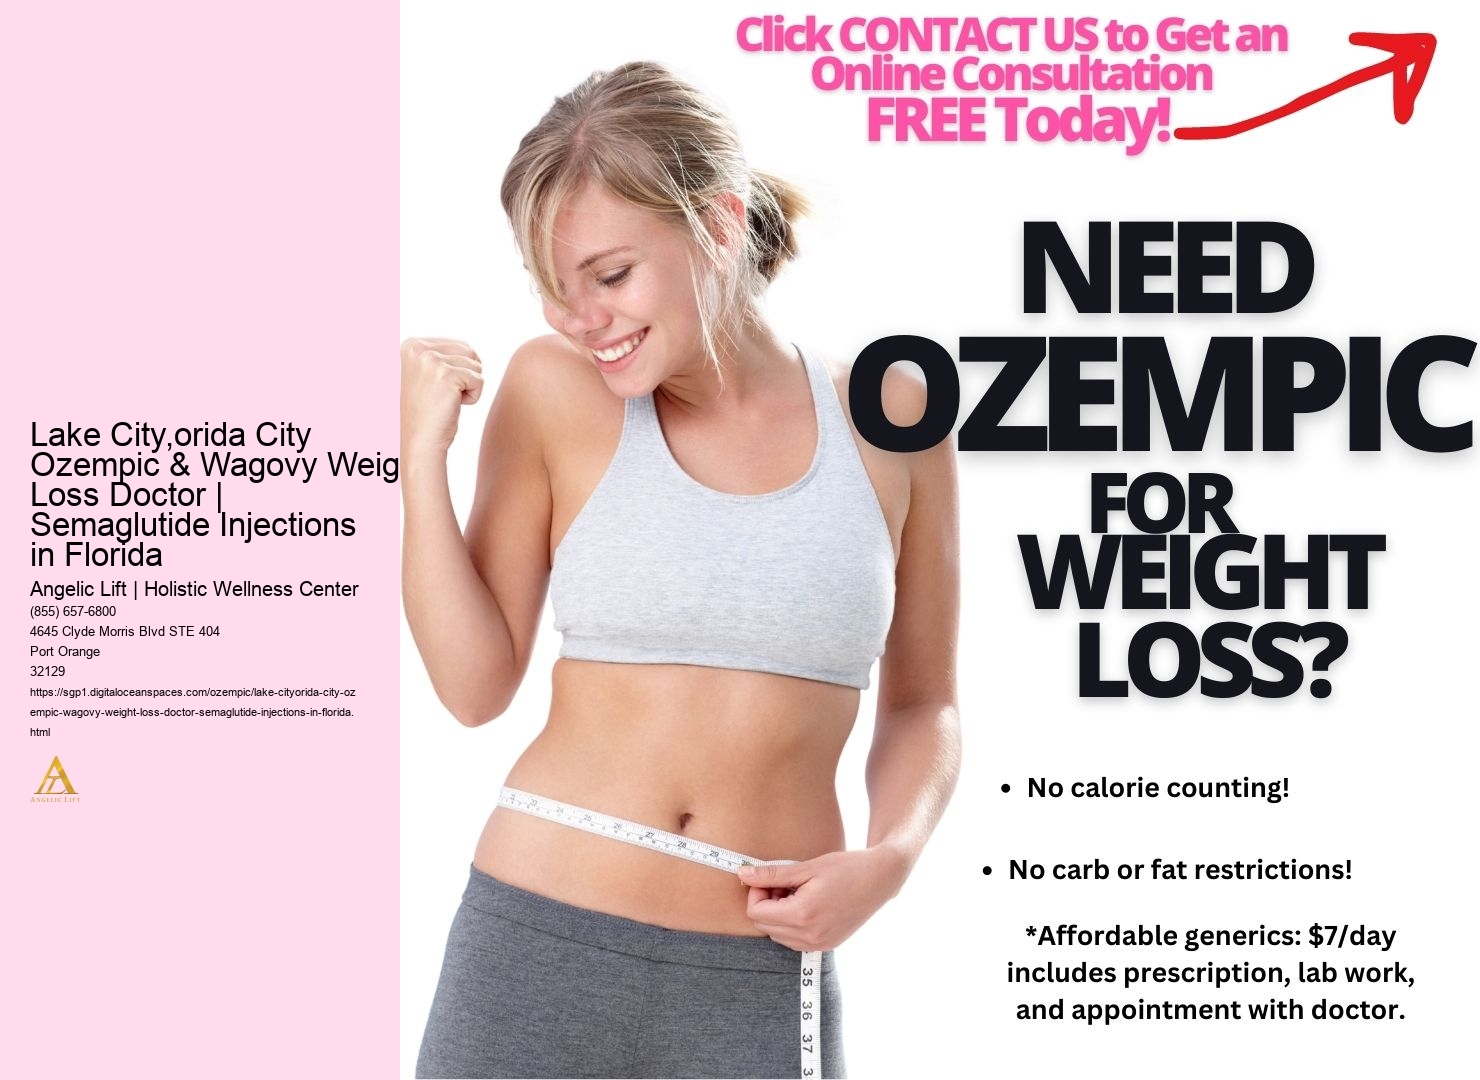 Lake City Ozempic & Wagovy Weight Loss Doctor | Semaglutide Injections in Florida